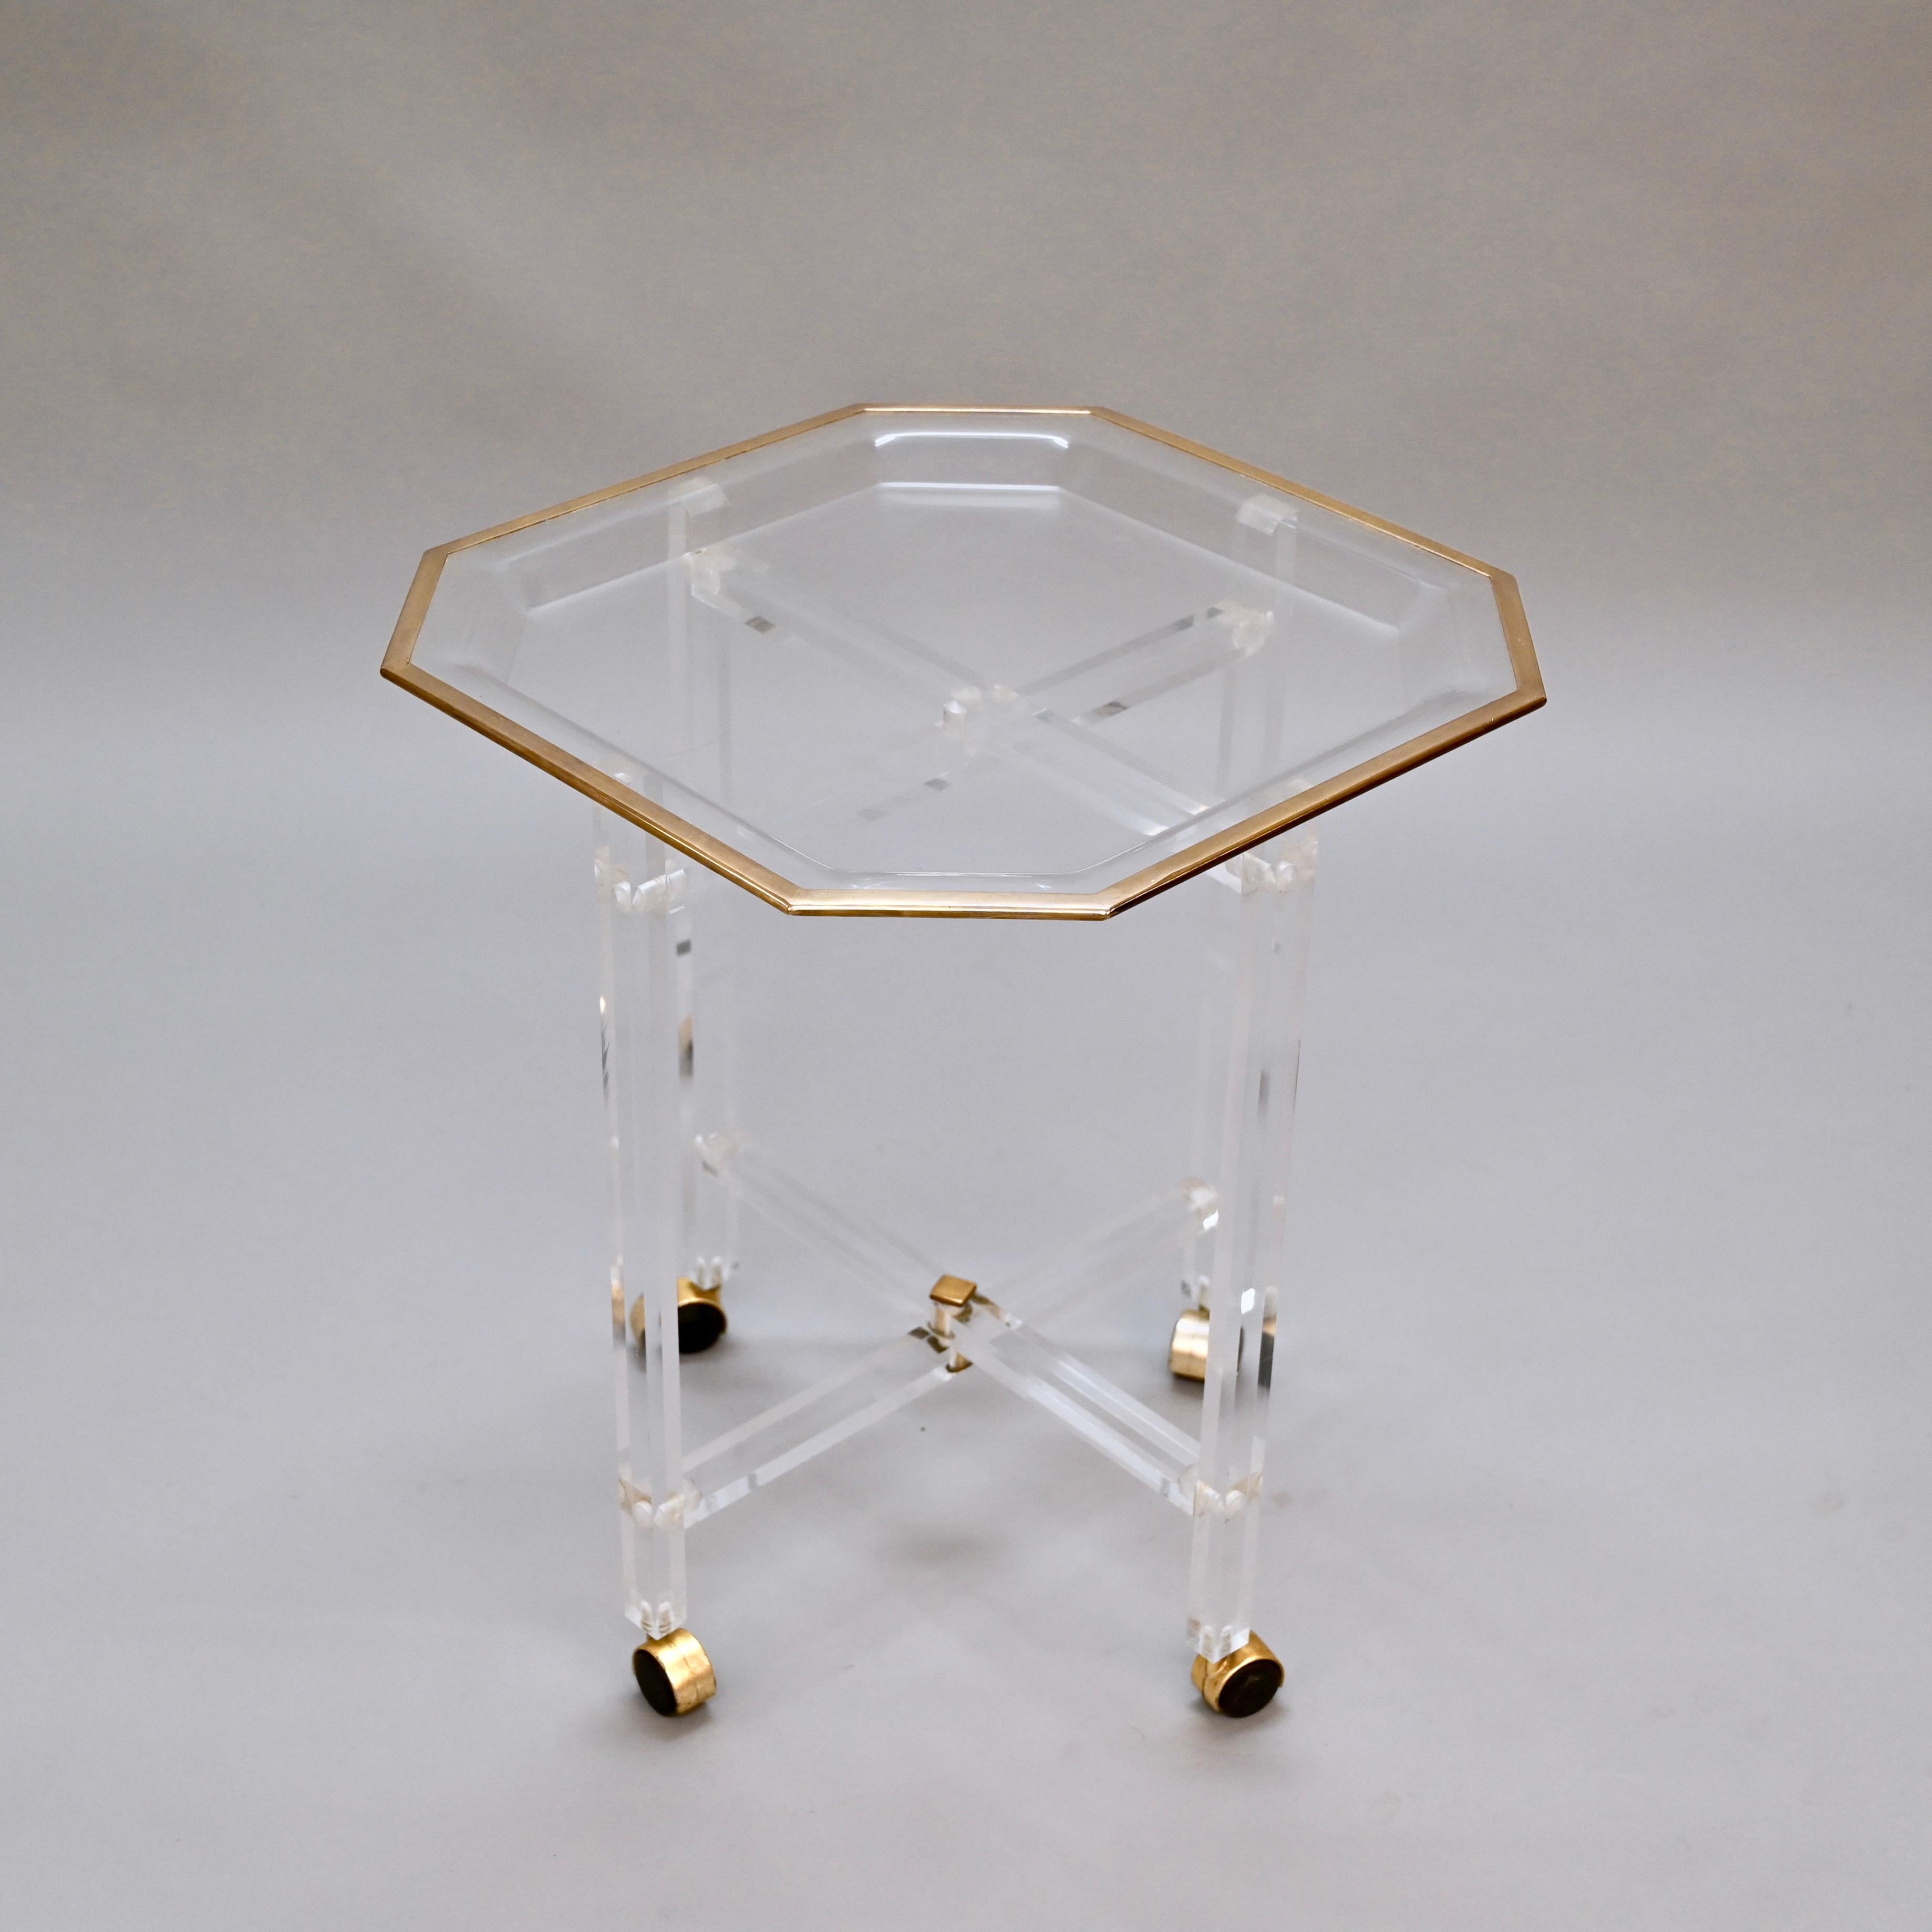 Midcentury Christian Dior Octagonal Lucite and Brass Coffee Table with Tray For Sale 6